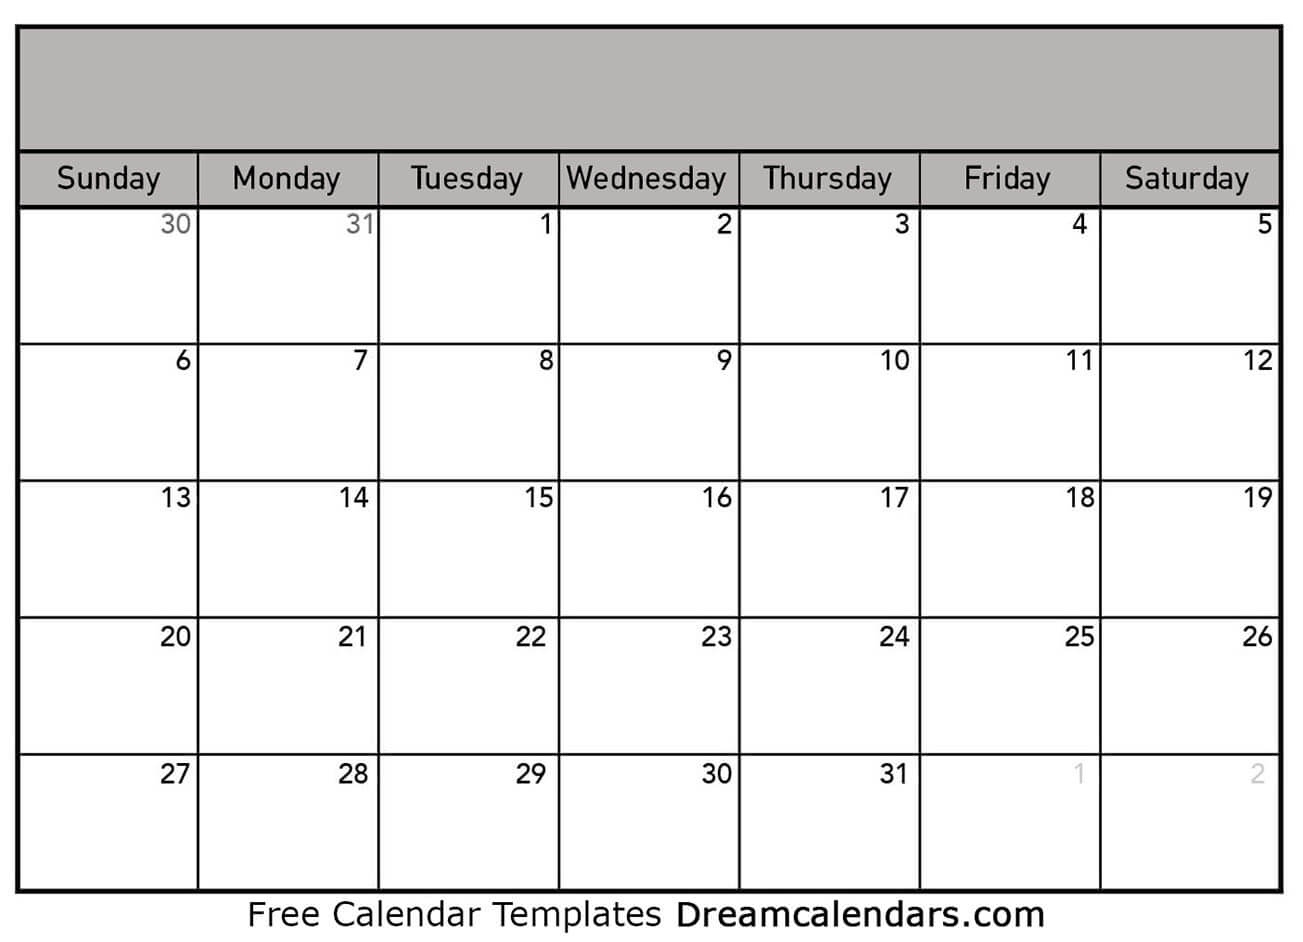 Printable Blank Calendar 2020 | Dream Calendars Incredible Blank Calendars With Days Of The Week Not Numbered